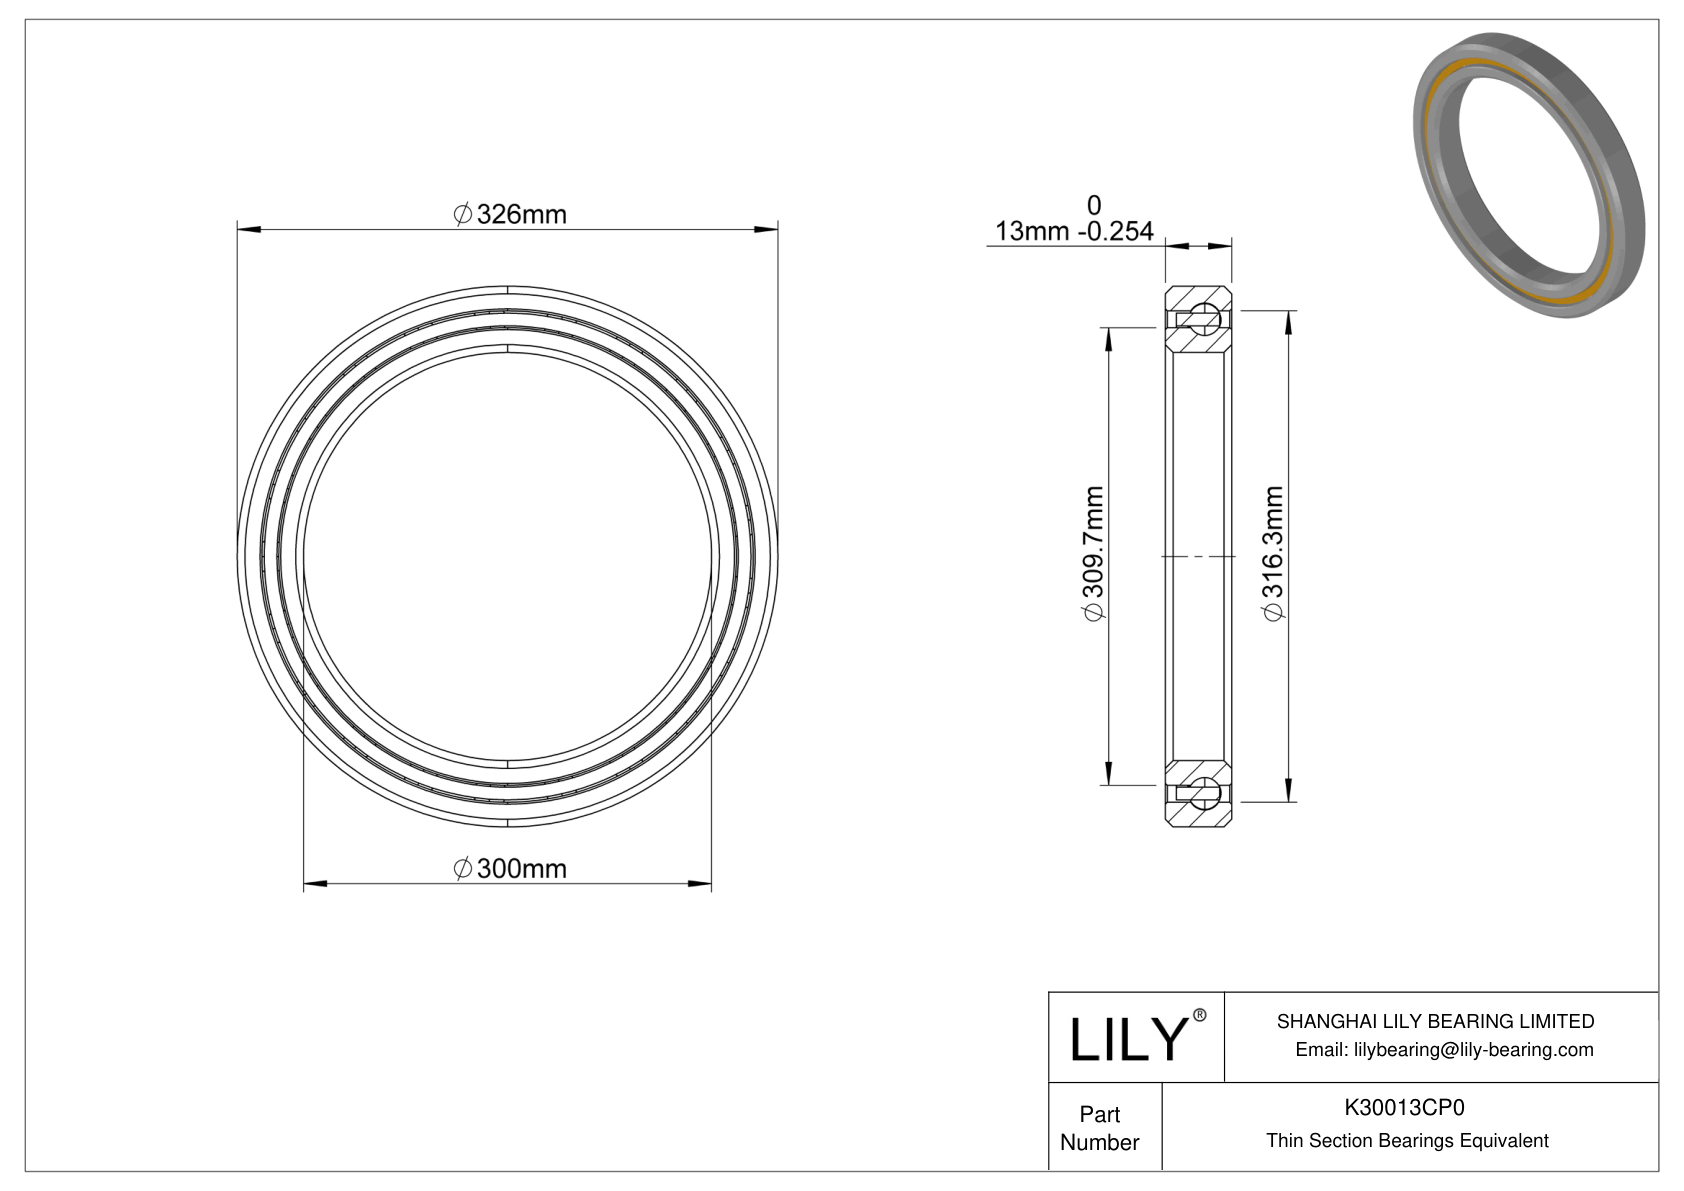 K30013CP0 Constant Section (CS) Bearings cad drawing